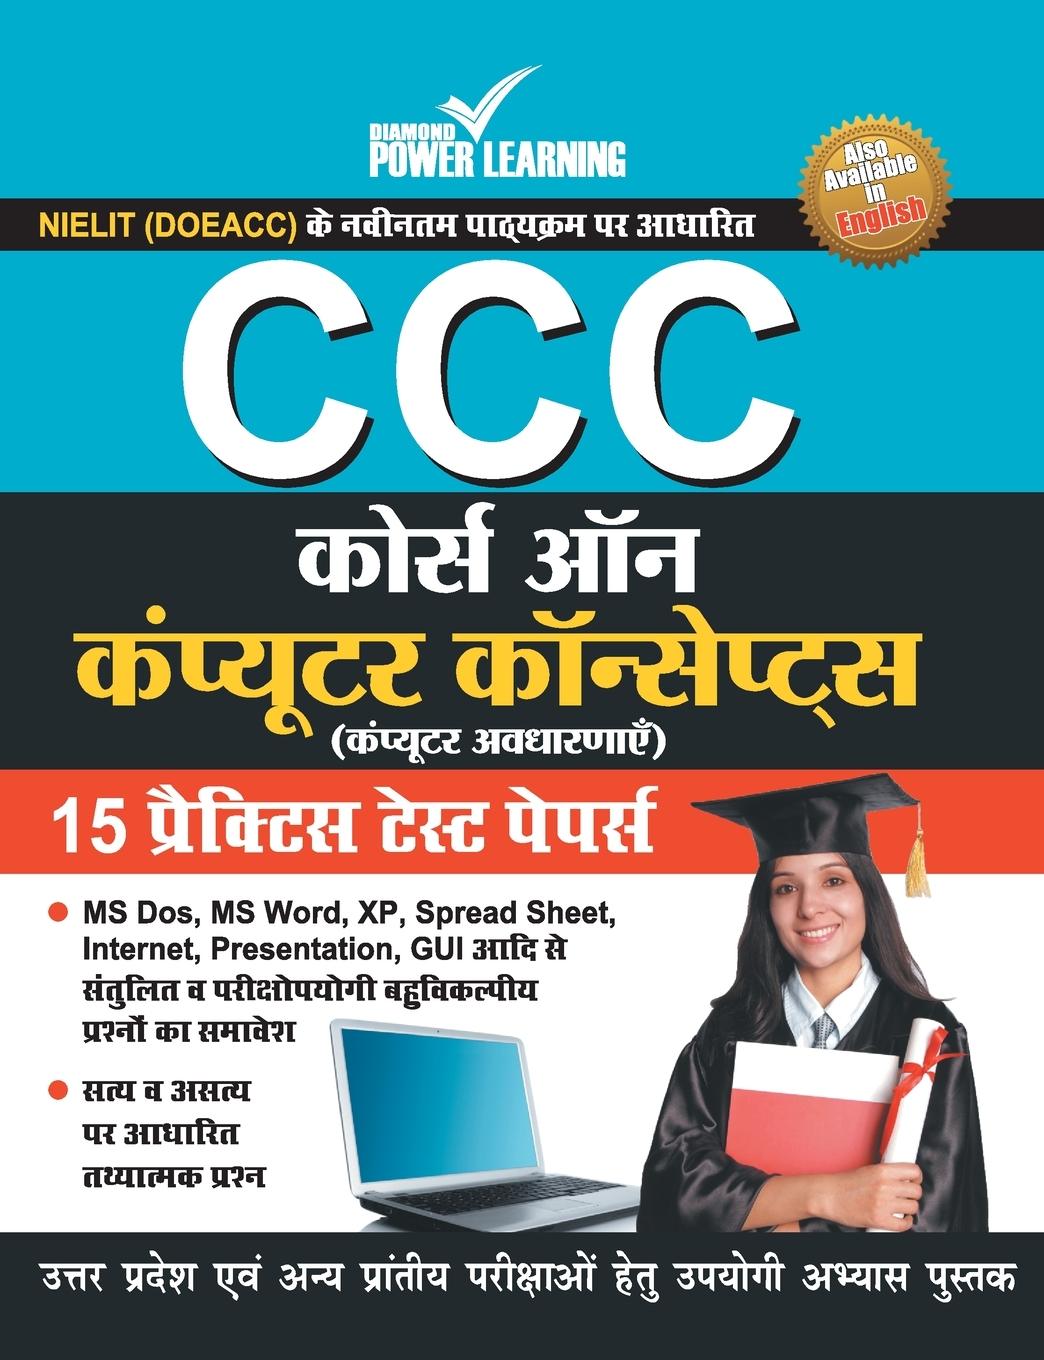 Book Ccc Course on Computer Concepts (Practice Test Papers) 